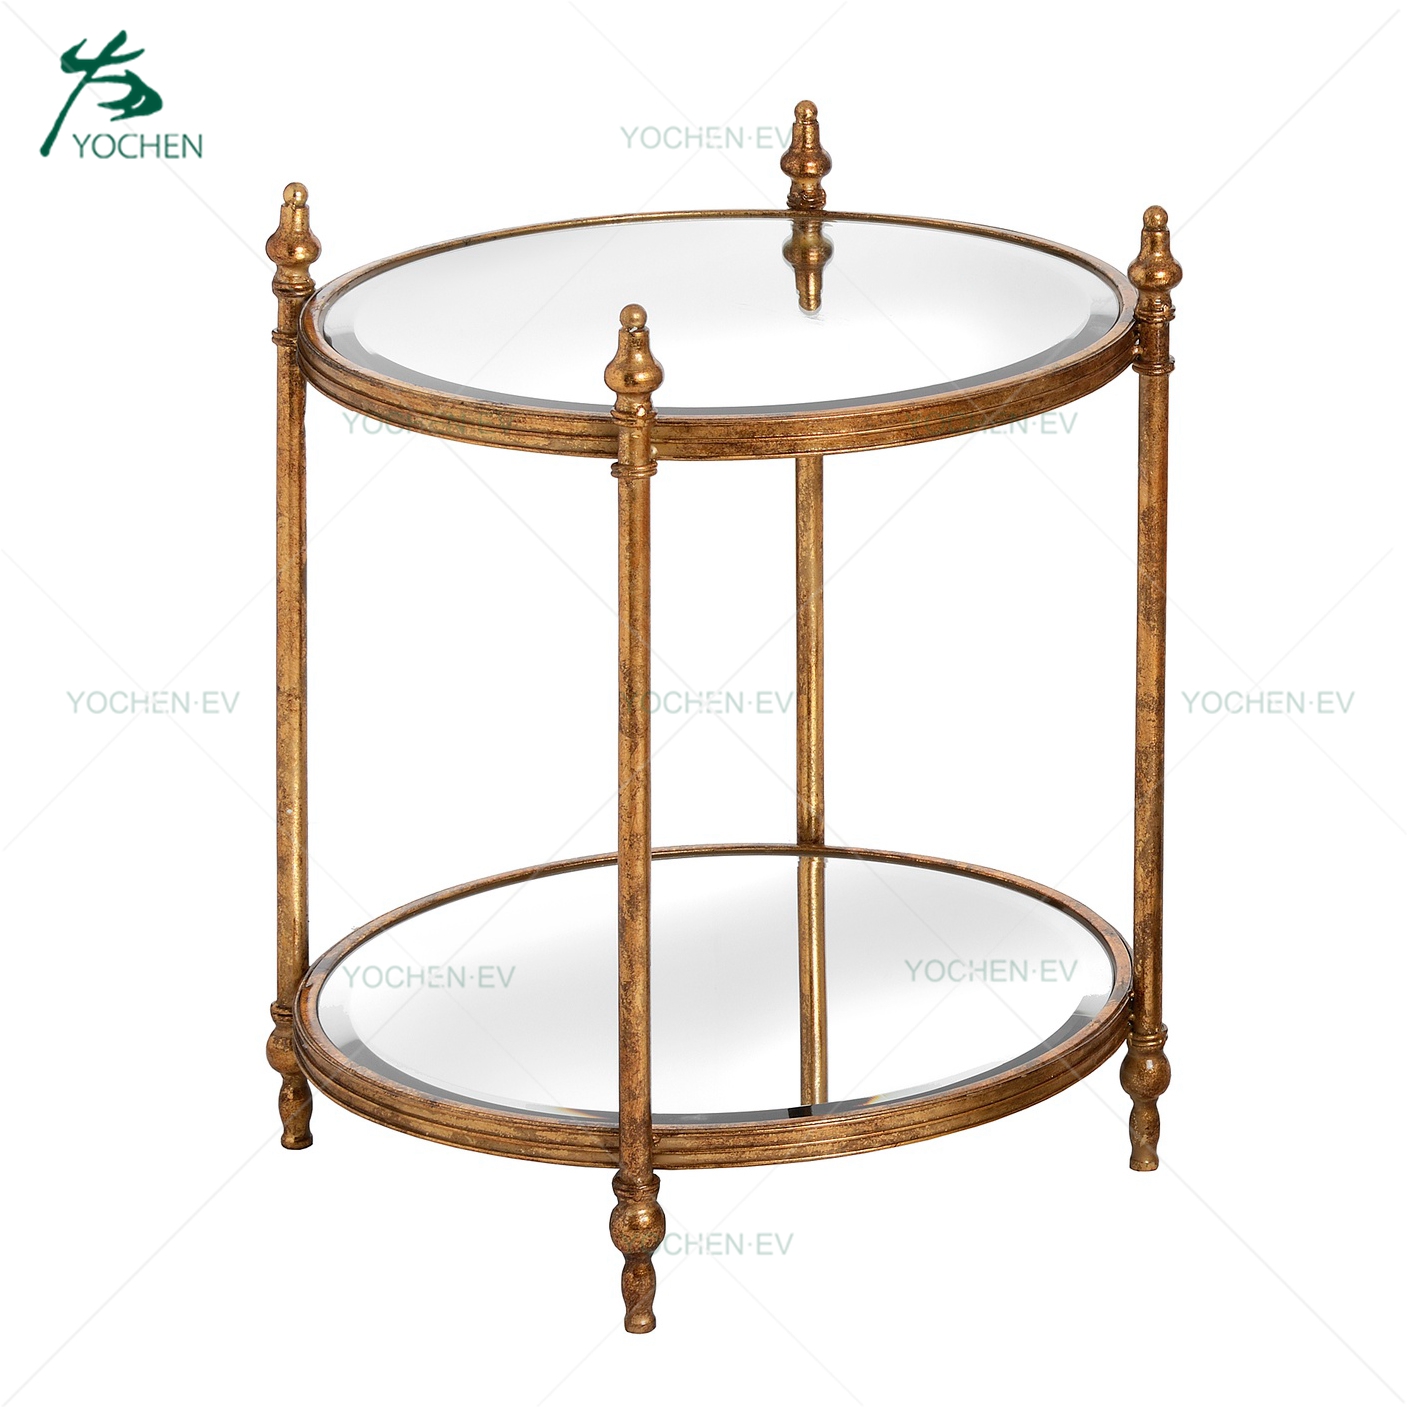 gold decorative nesting round set of 2 metal end table